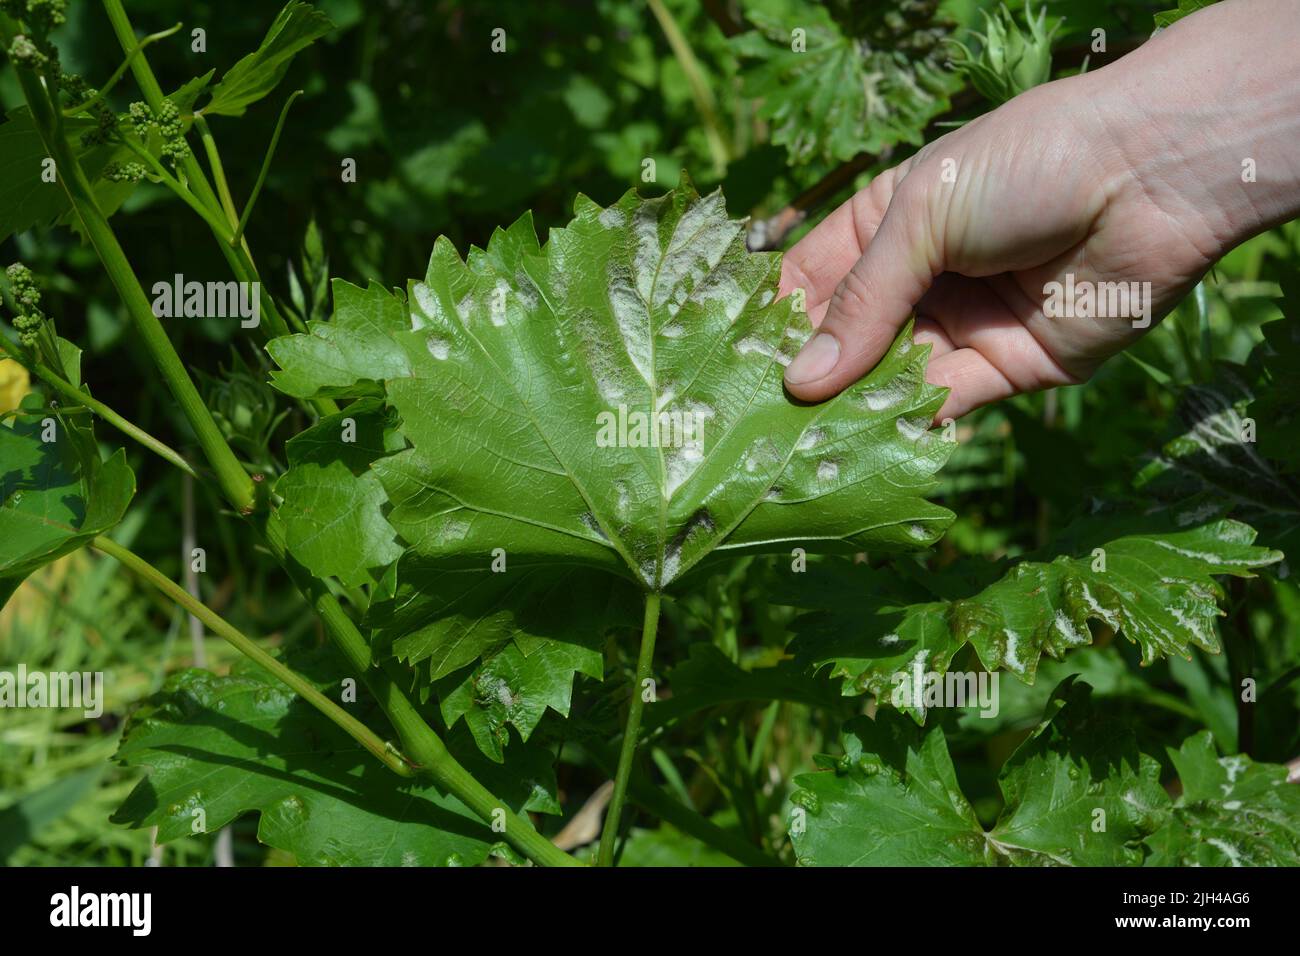 Farmer show grapevine infected by mildew grapevine disease on the underside of the leaf. Stock Photo